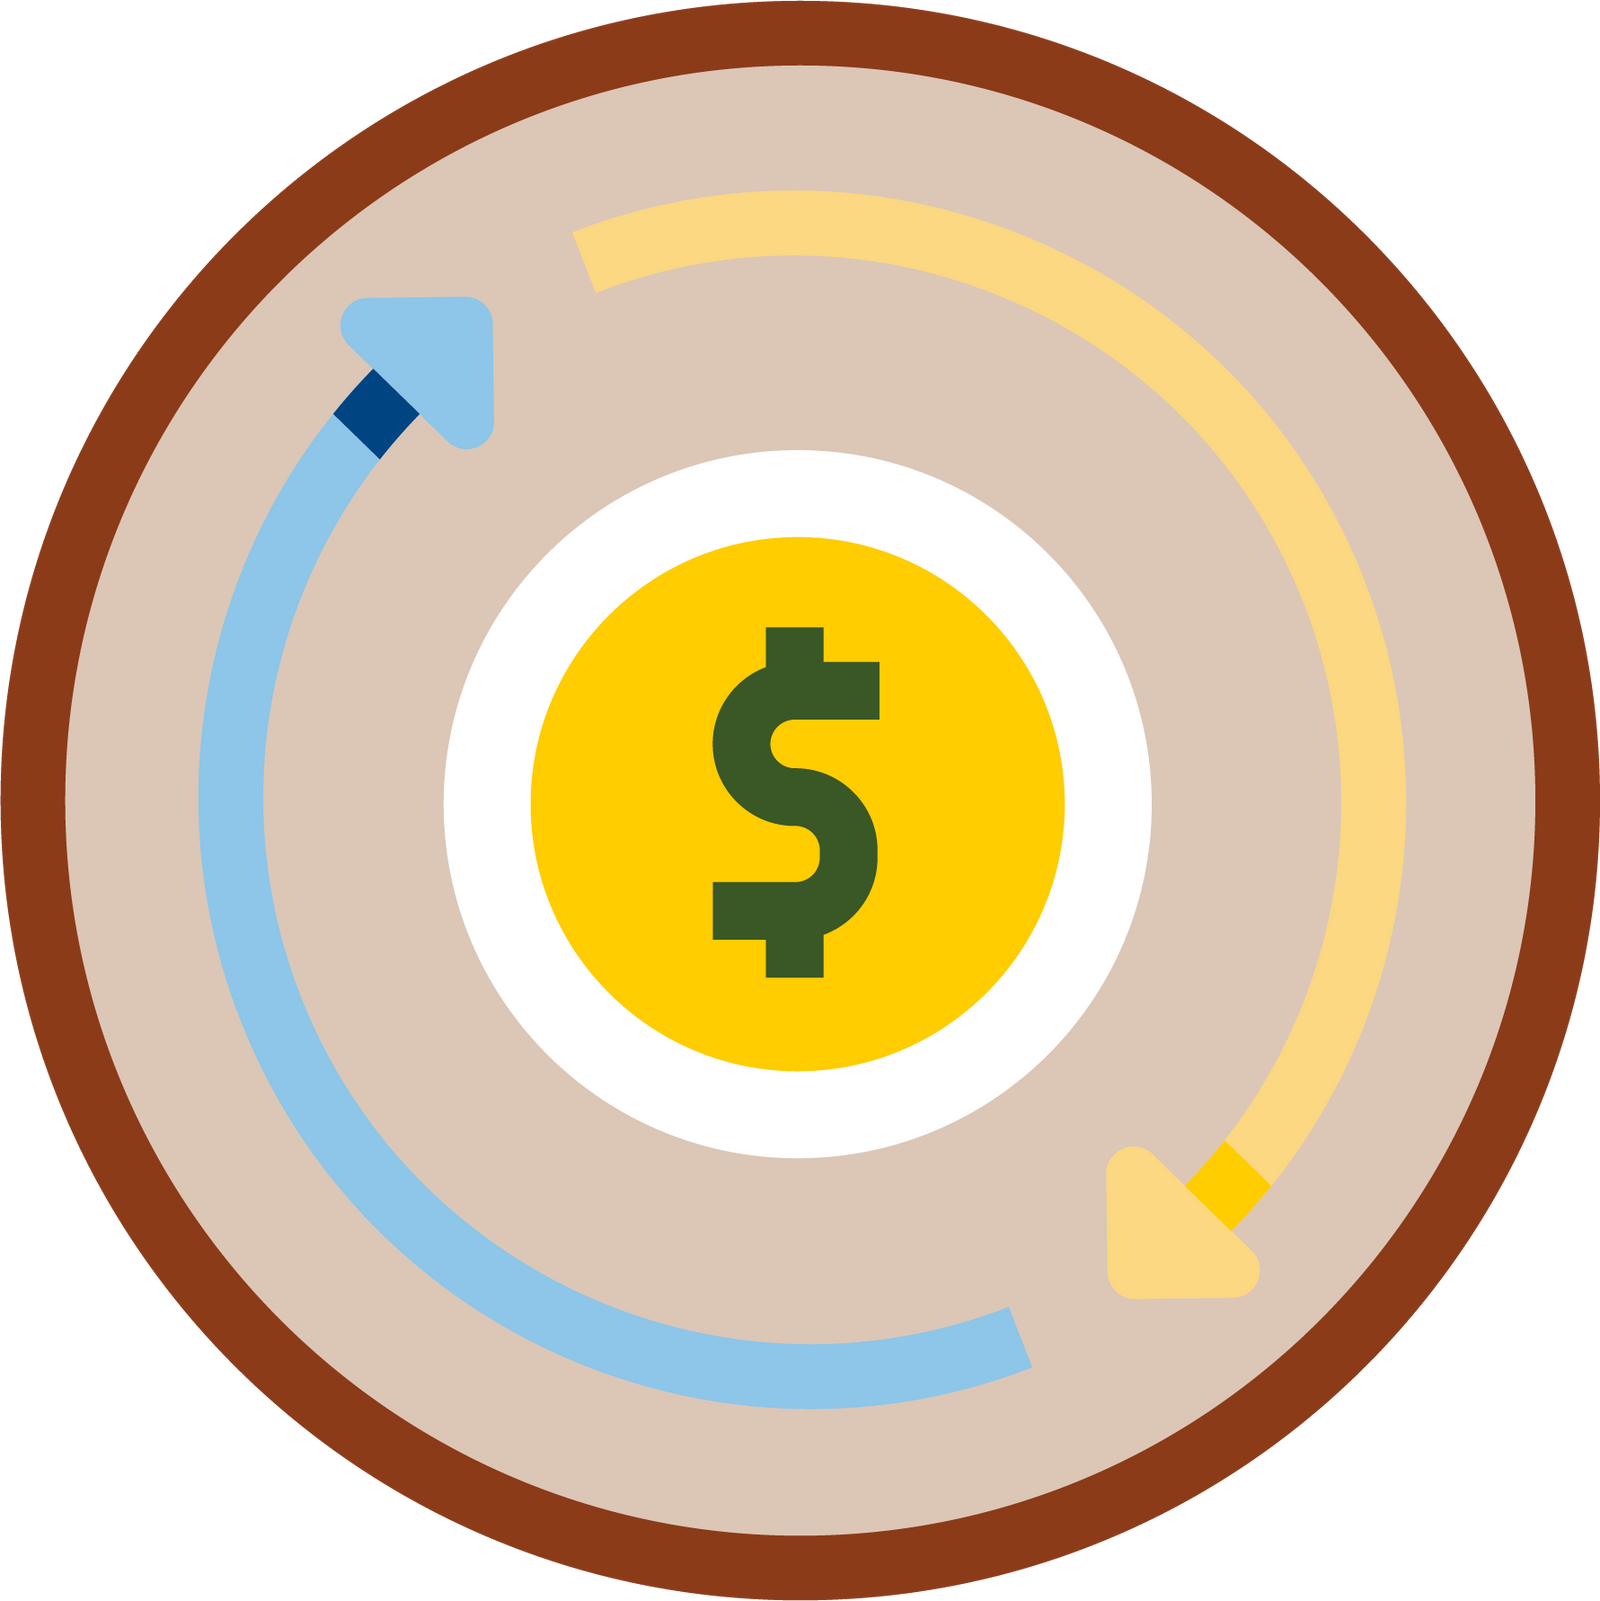 Circular economy icon, rounded arrow pointing up and rounded arrow pointing down with a dollar sign in the middle